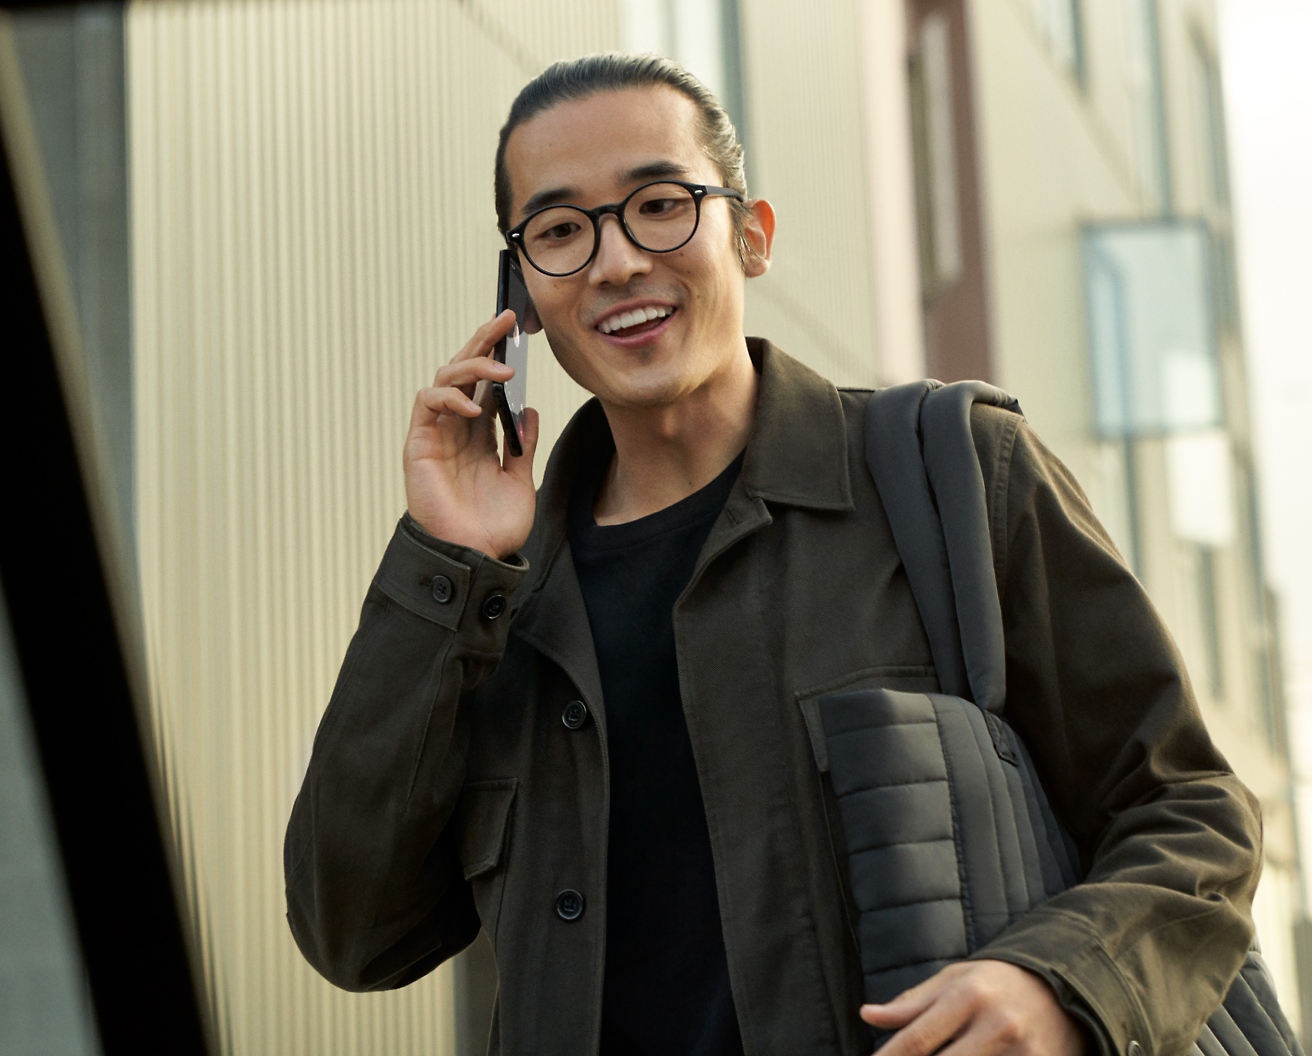 A person in a glasses holding a cell phone and smiling